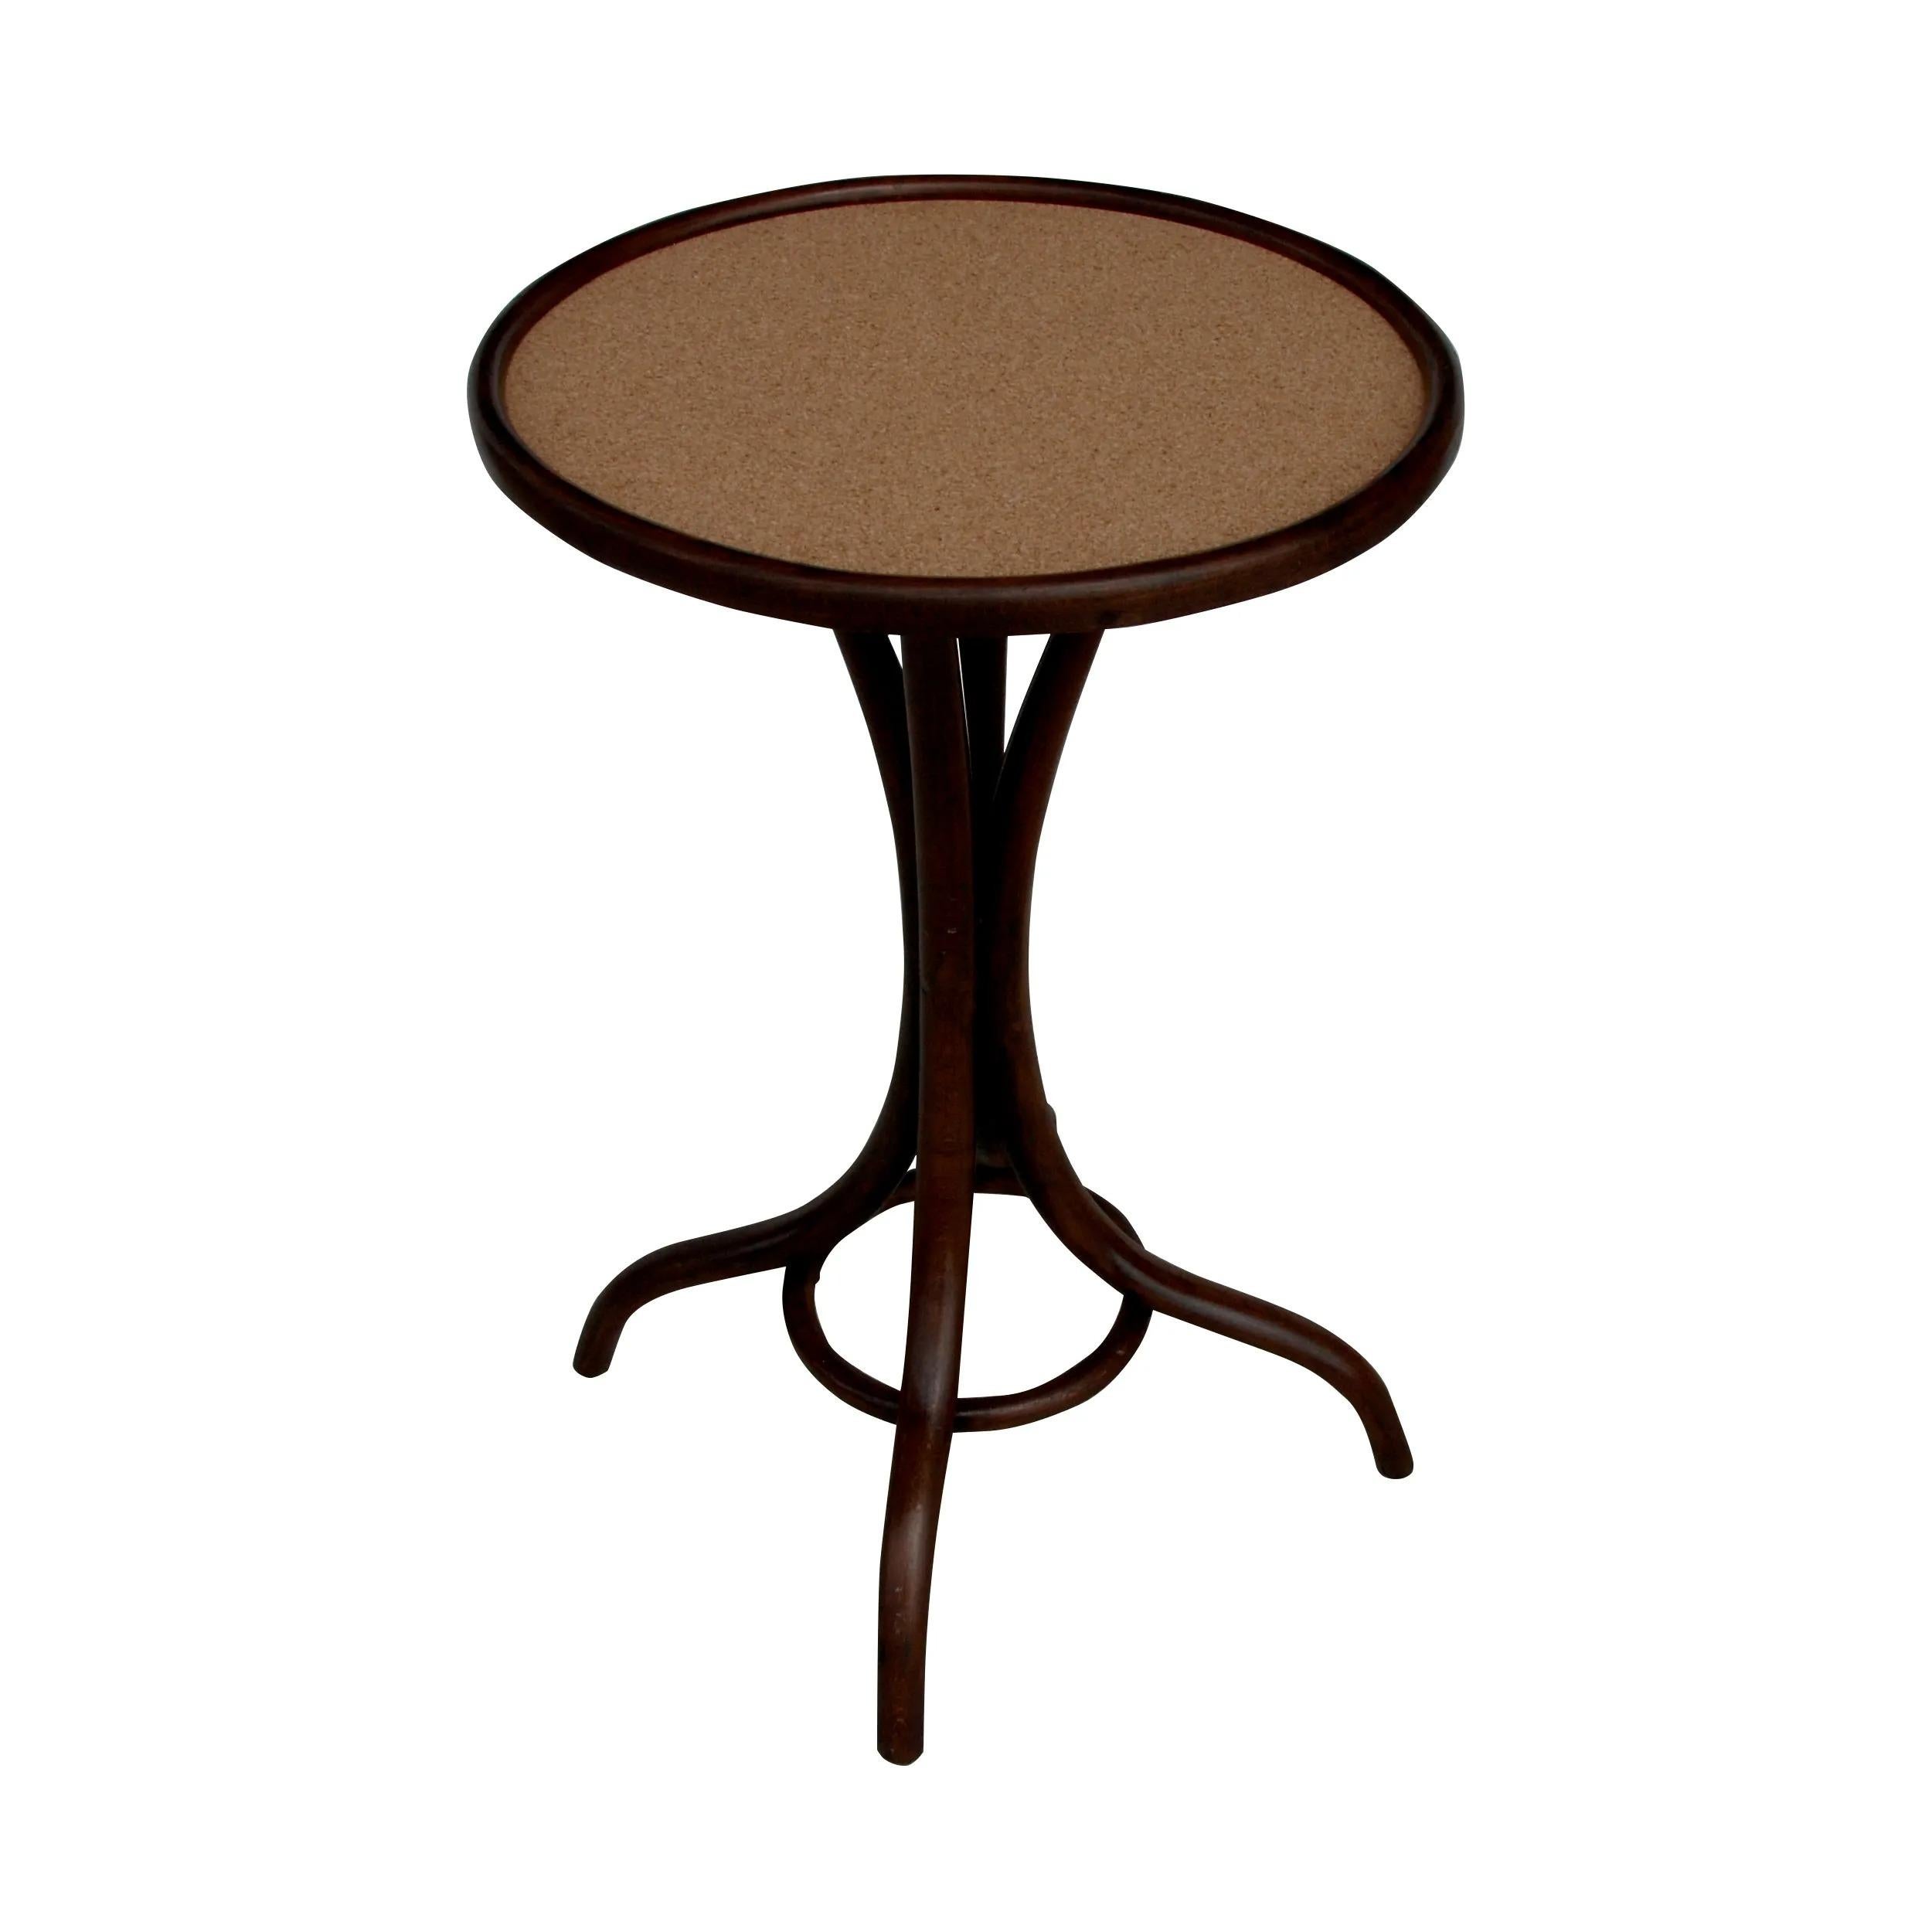 Art Nouveau Early Thonet Pedestal Table with Cork Top